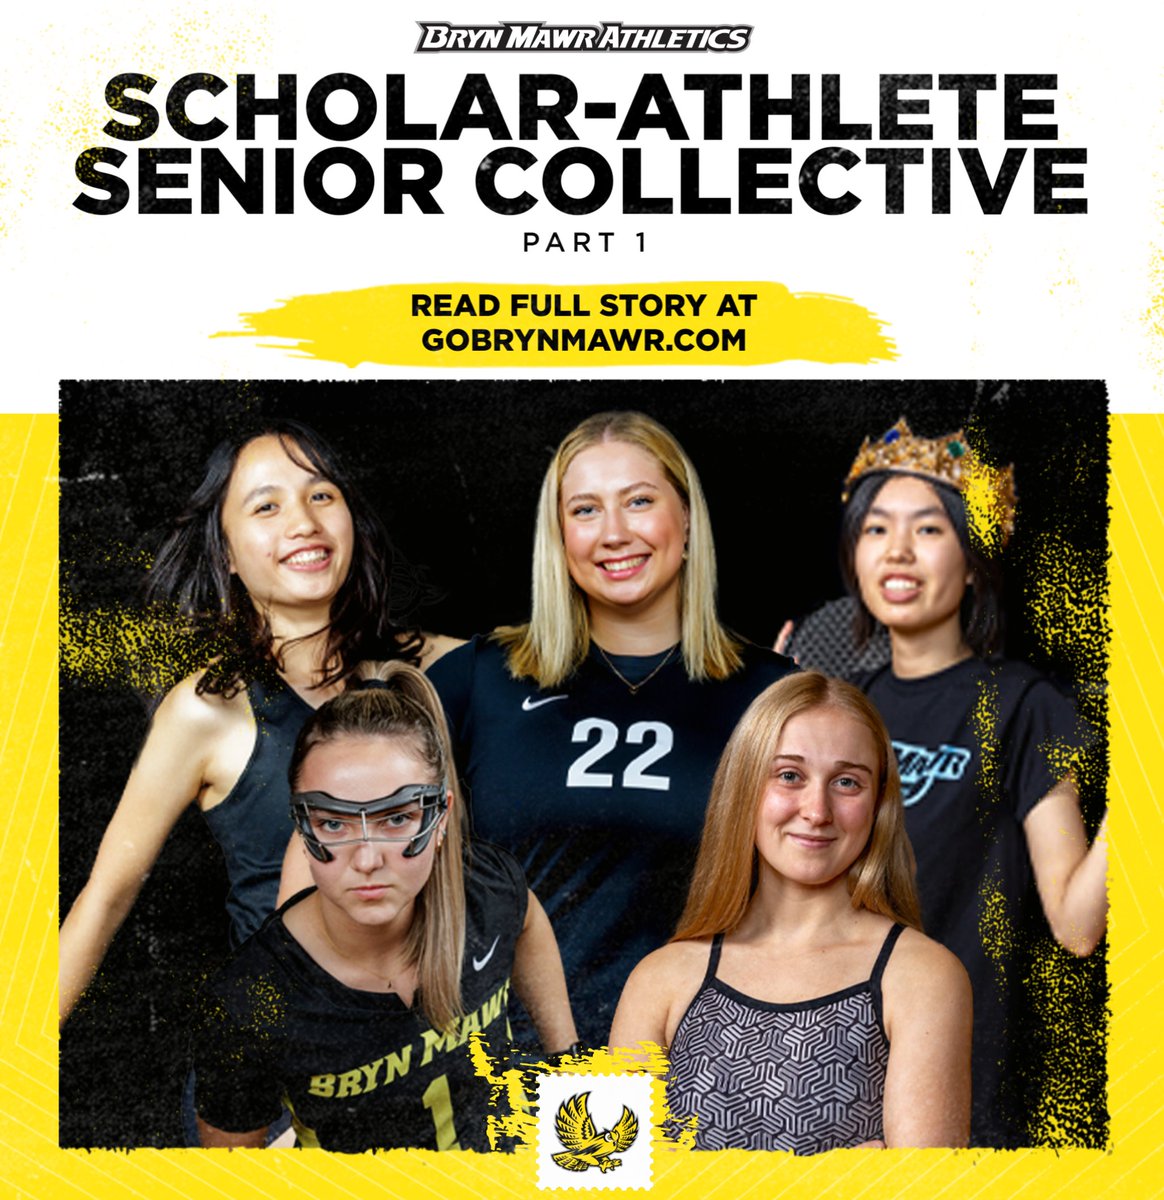 Check out GoBrynMawr.com to read the favorite memories and post graduation plans of some of our senior scholar-athletes in our Scholar-Athlete Senior Collective Part 1 story! Part 2 will be posted next week! Congrats to the Class of 2024! 🦉 🏃‍♂️⚽🏸🥍🏊‍♀️
#GoOwls #TalonsOut